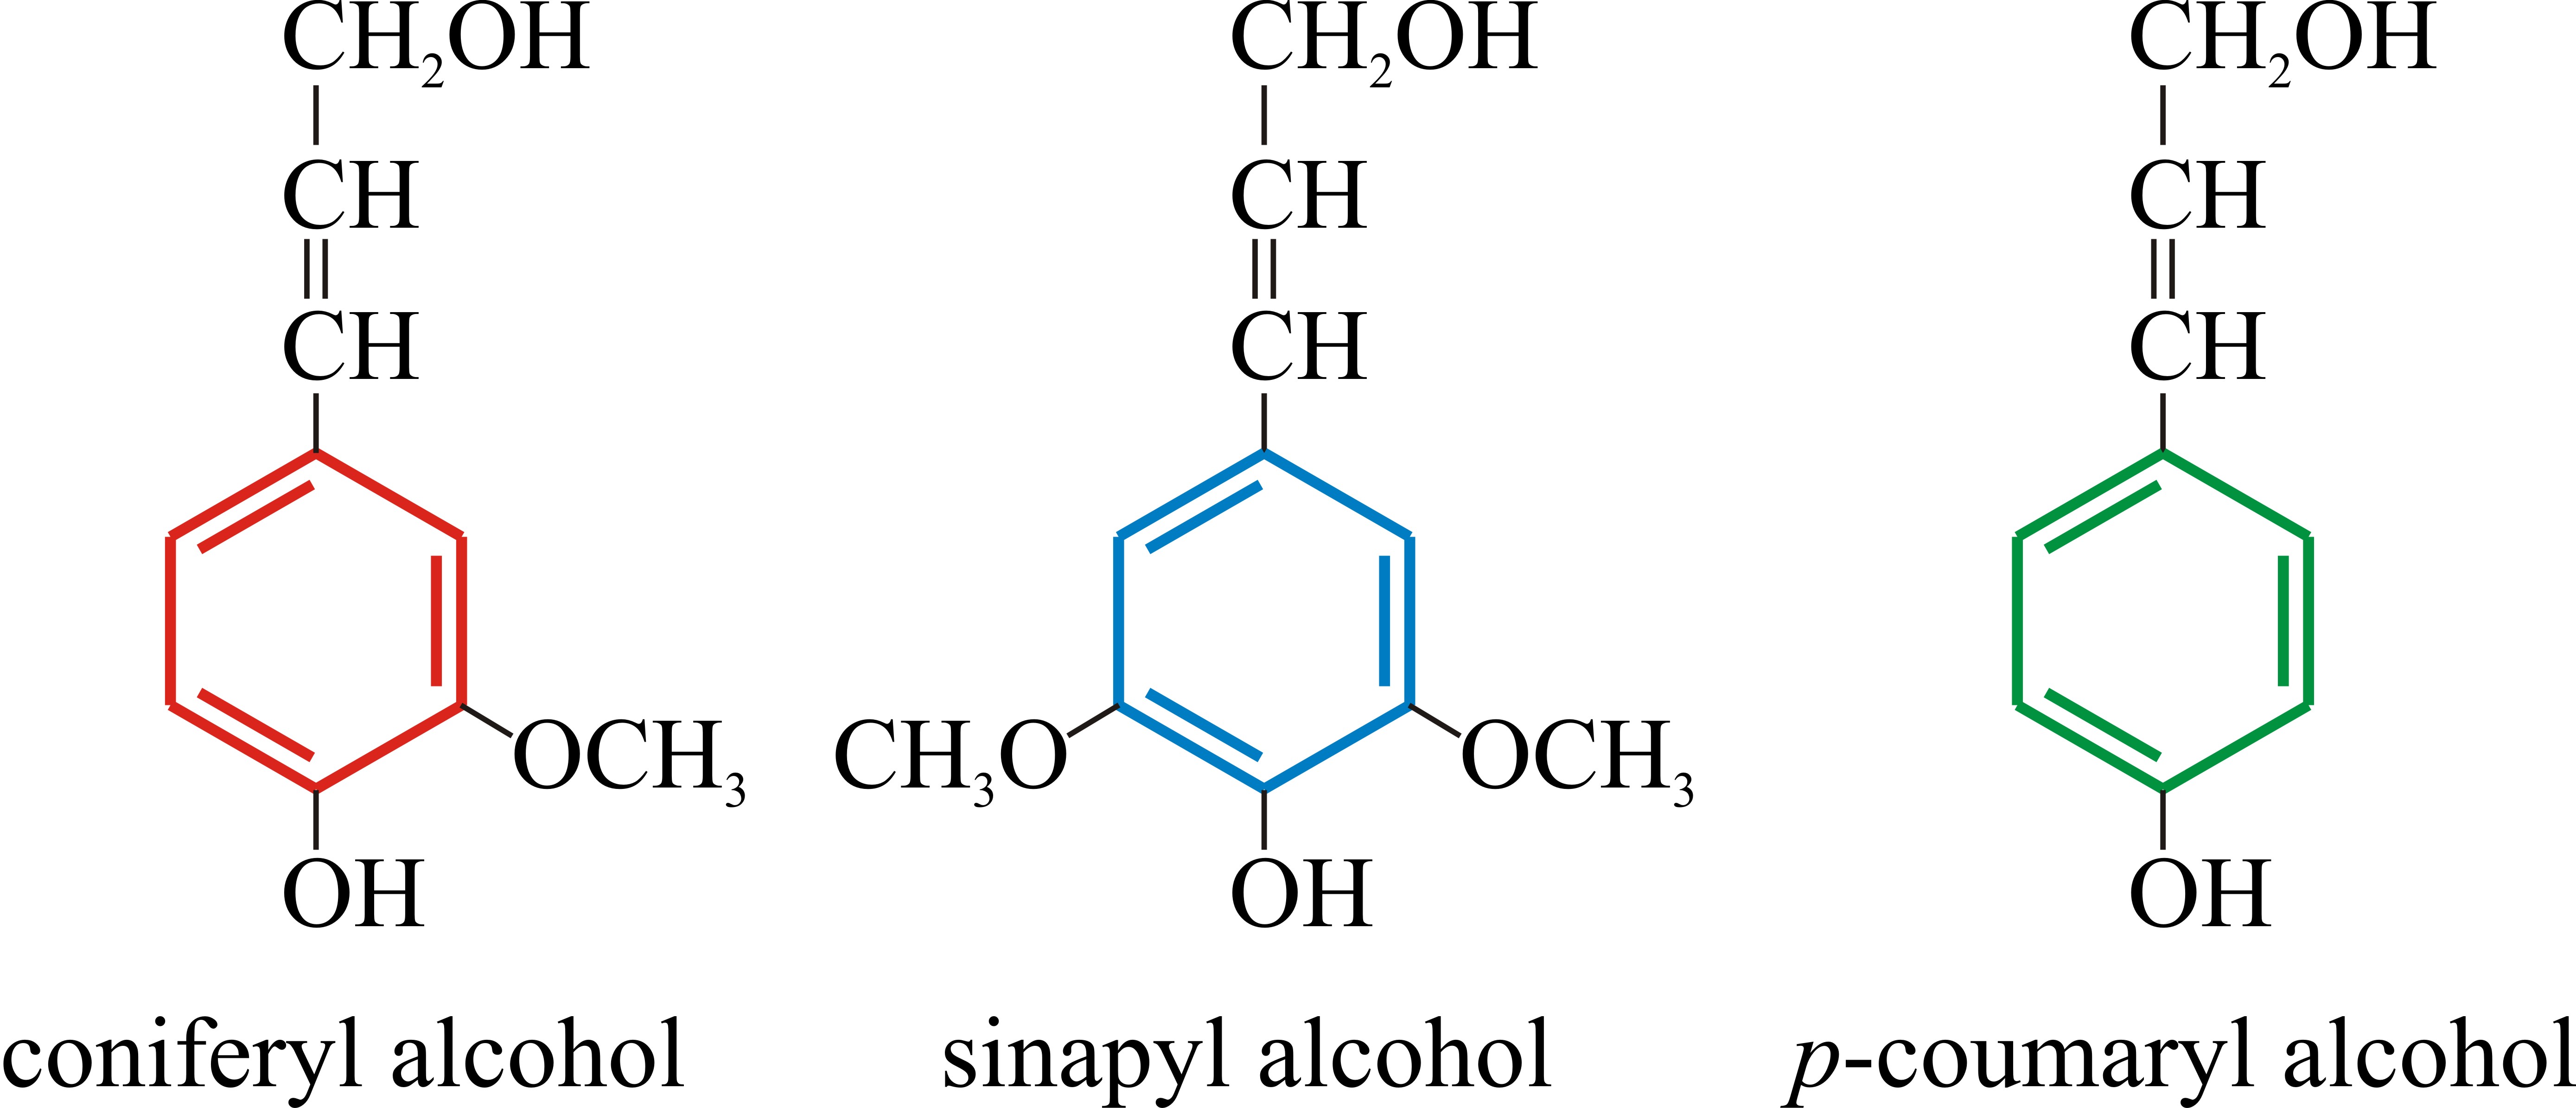 Chemical structures of the phenylpropanoid alcohols used to construct the lignin polymer